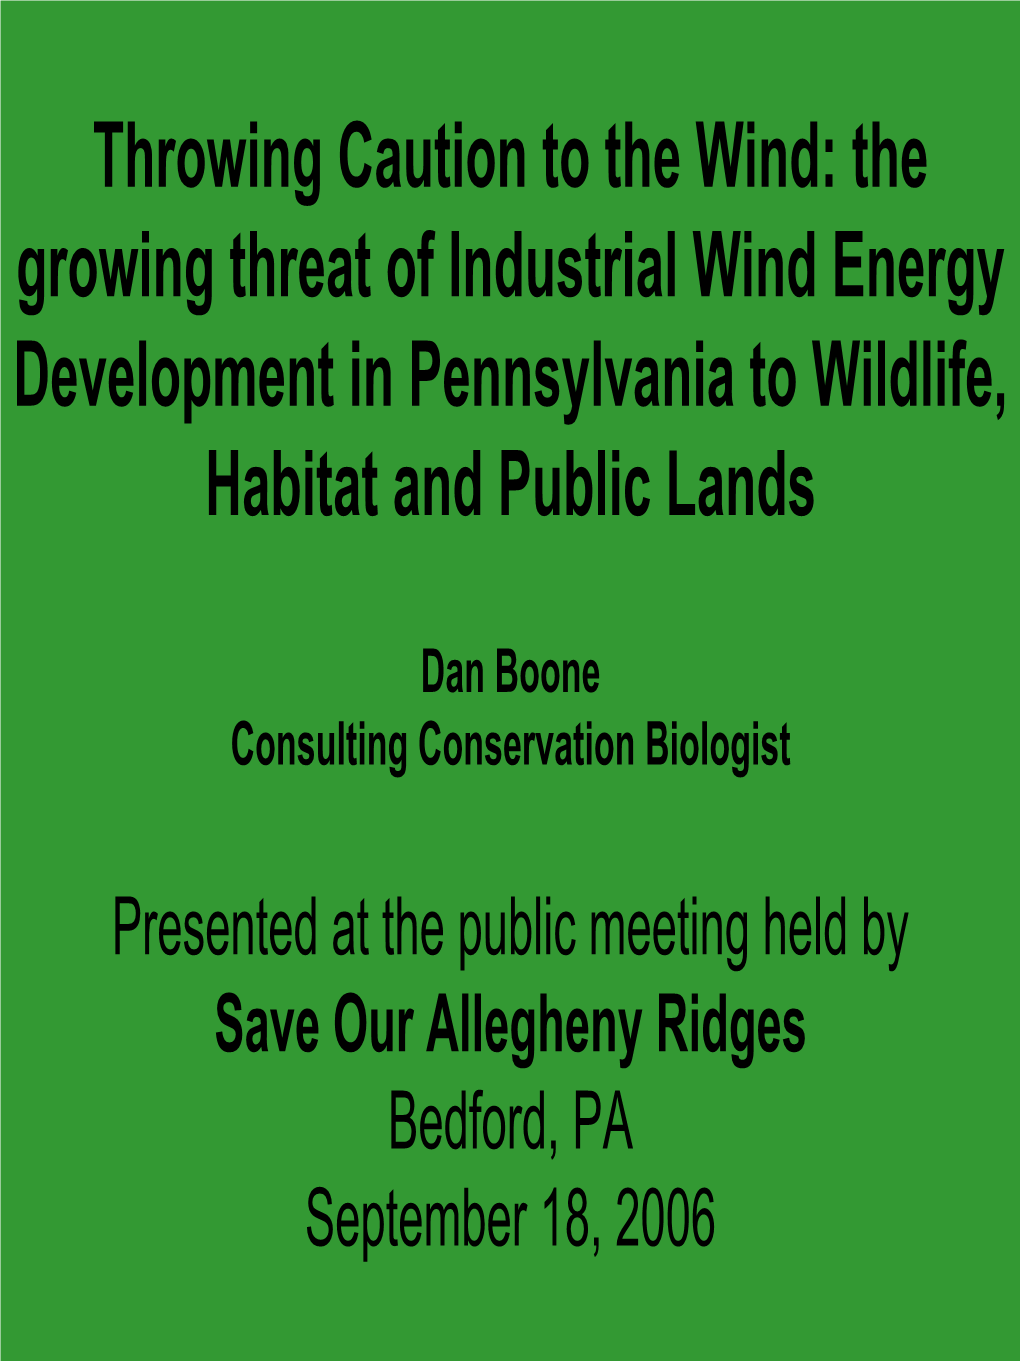 Throwing Caution to the Wind: the Growing Threat of Industrial Wind Energy Development in Pennsylvania to Wildlife, Habitat and Public Lands